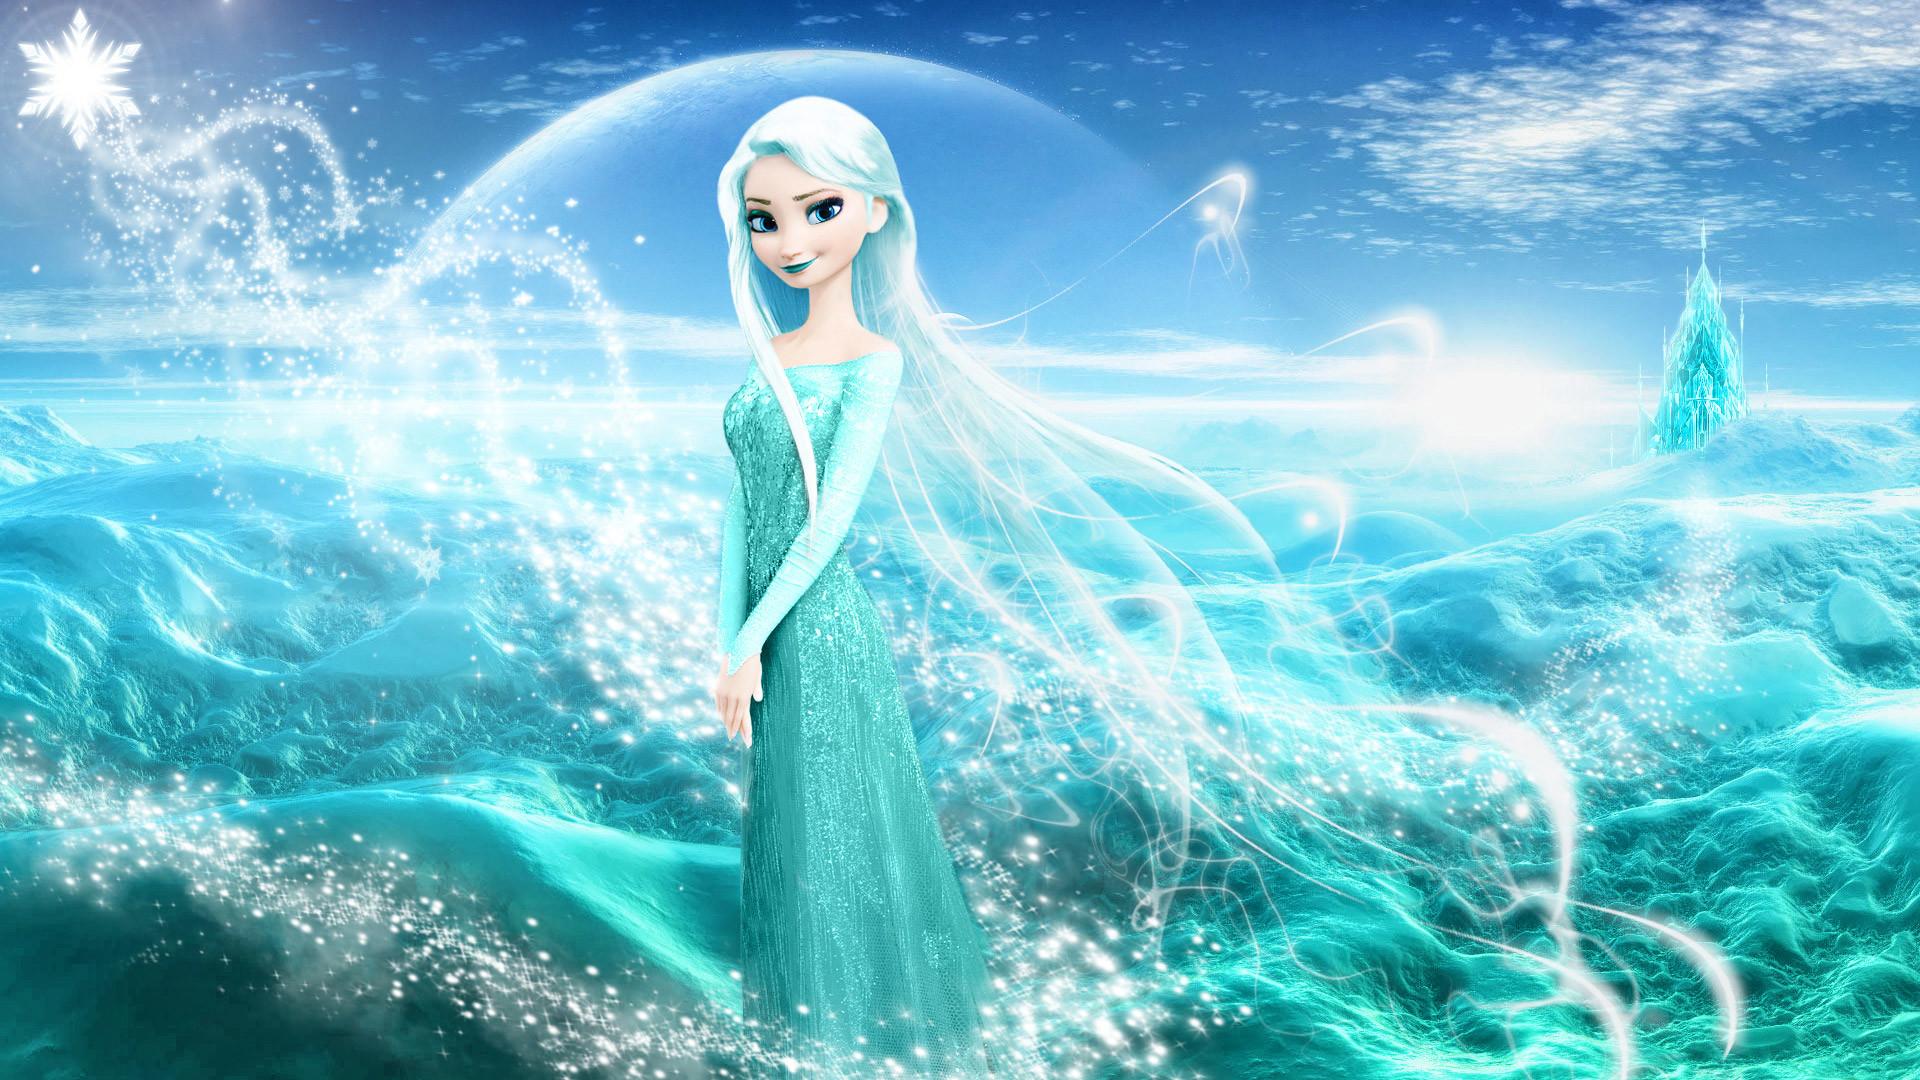 Frozen 2 The Snow Queen Elsa And Anna Wallpapers - Wallpaper Cave